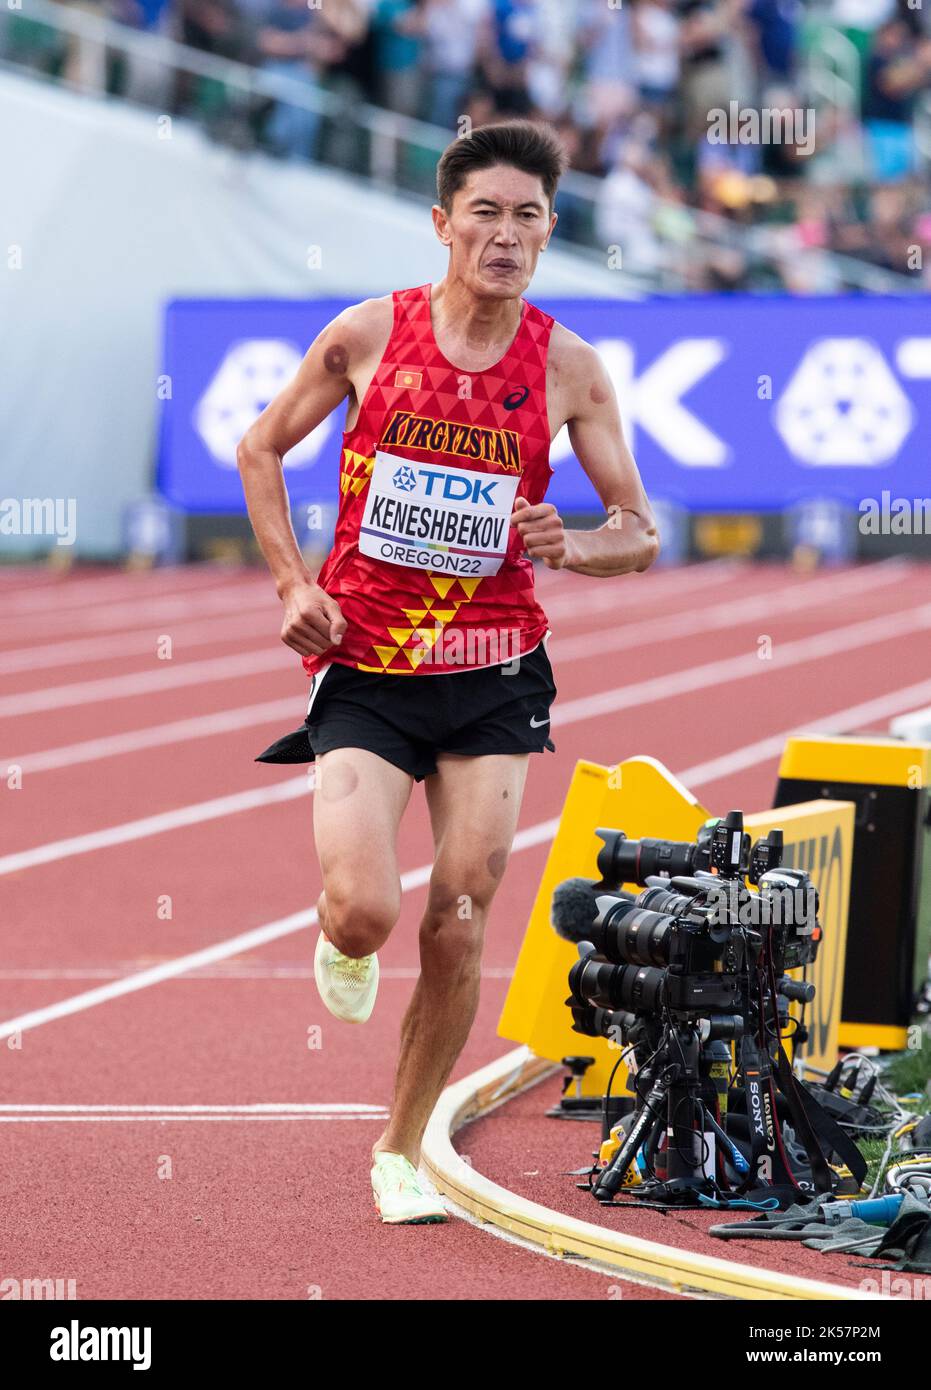 Nursultan Keneshbekov of Kirghizistan competing in the men’s 5000m heats at the World Athletics Championships, Hayward Field, Eugene, Oregon USA on th Stock Photo